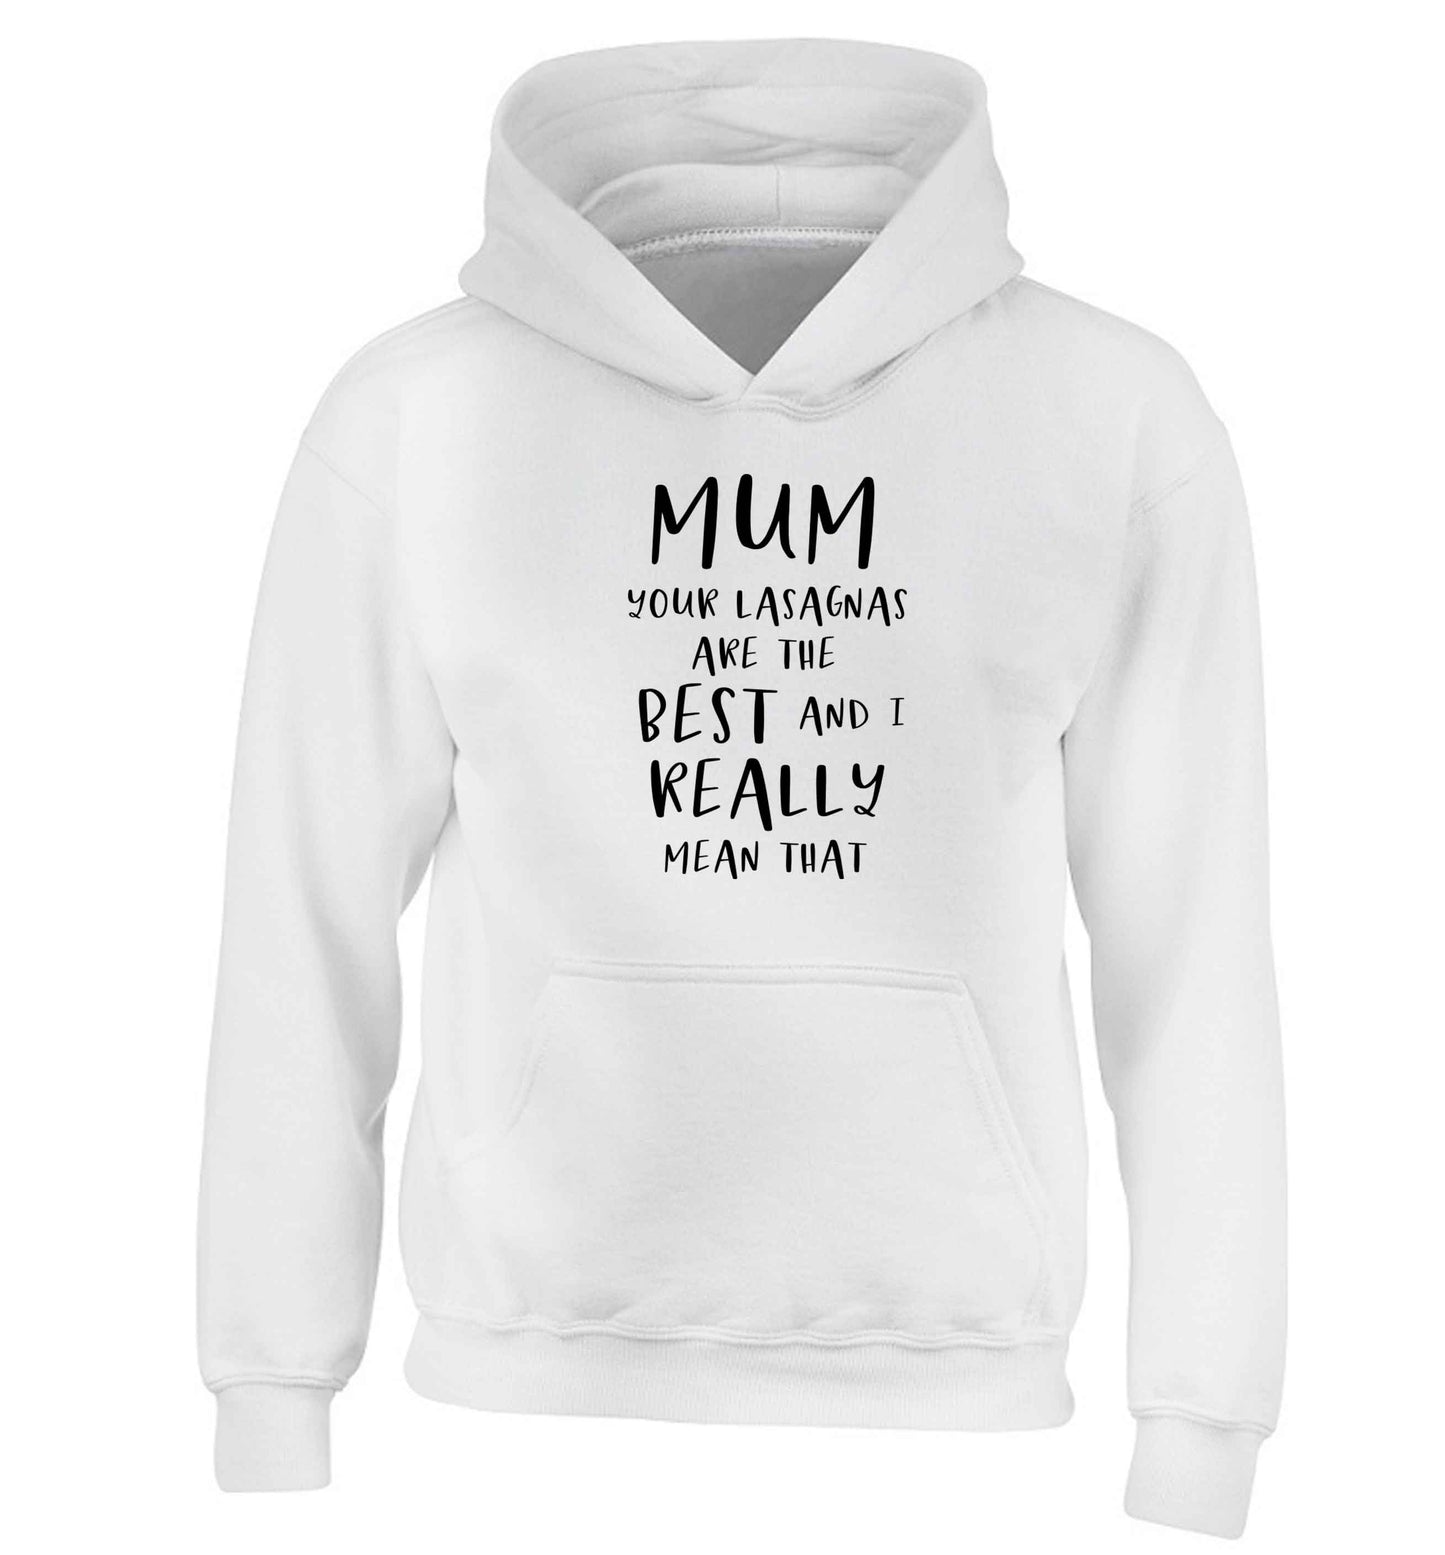 Funny gifts for your mum on mother's dayor her birthday! Mum your lasagnas are the best and I really mean that children's white hoodie 12-13 Years